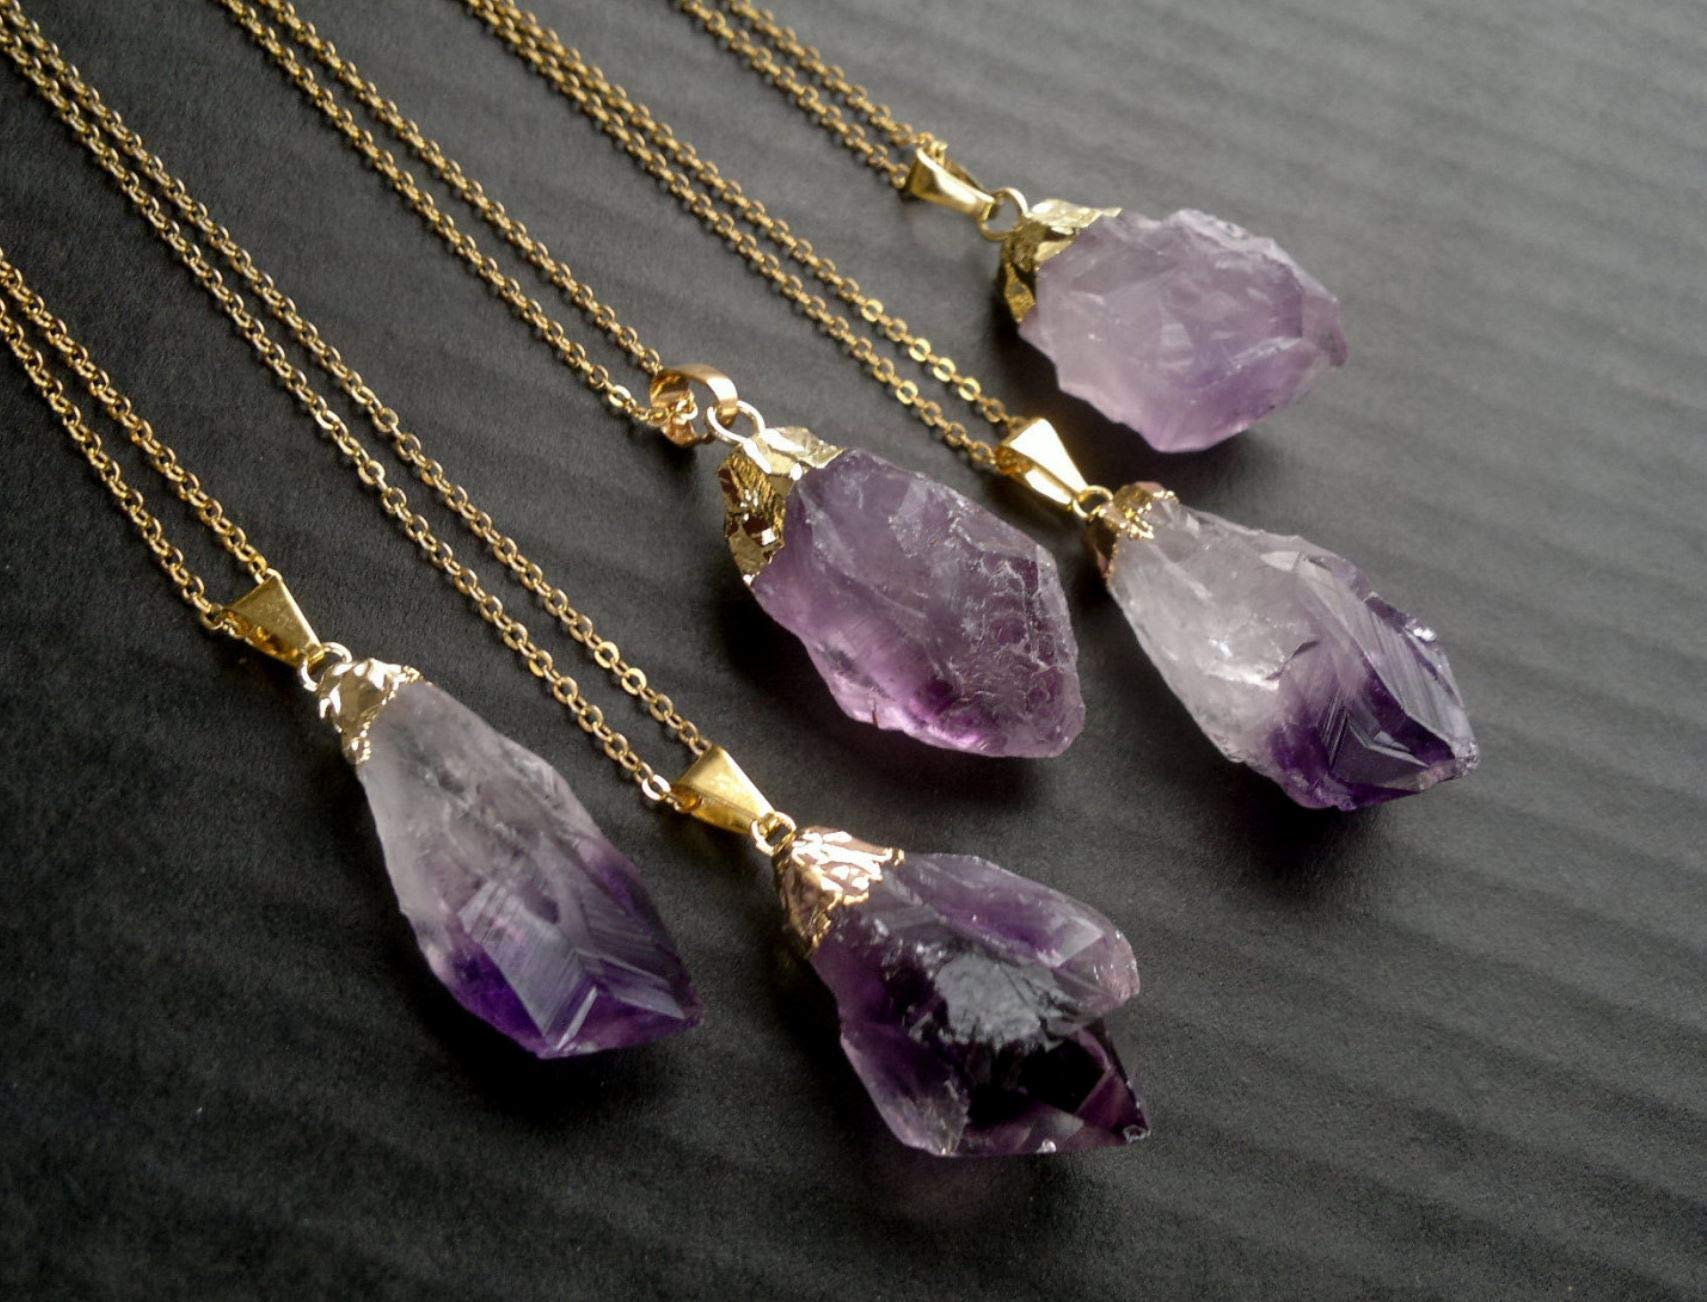 Adabele 1pc Authentic Sterling Silver Raw Amethyst Citrine Gemstone Necklace 18 inch Healing Crystal Chakra Stone Hypoallergenic Nickel Free Women Girl Birthday Gift